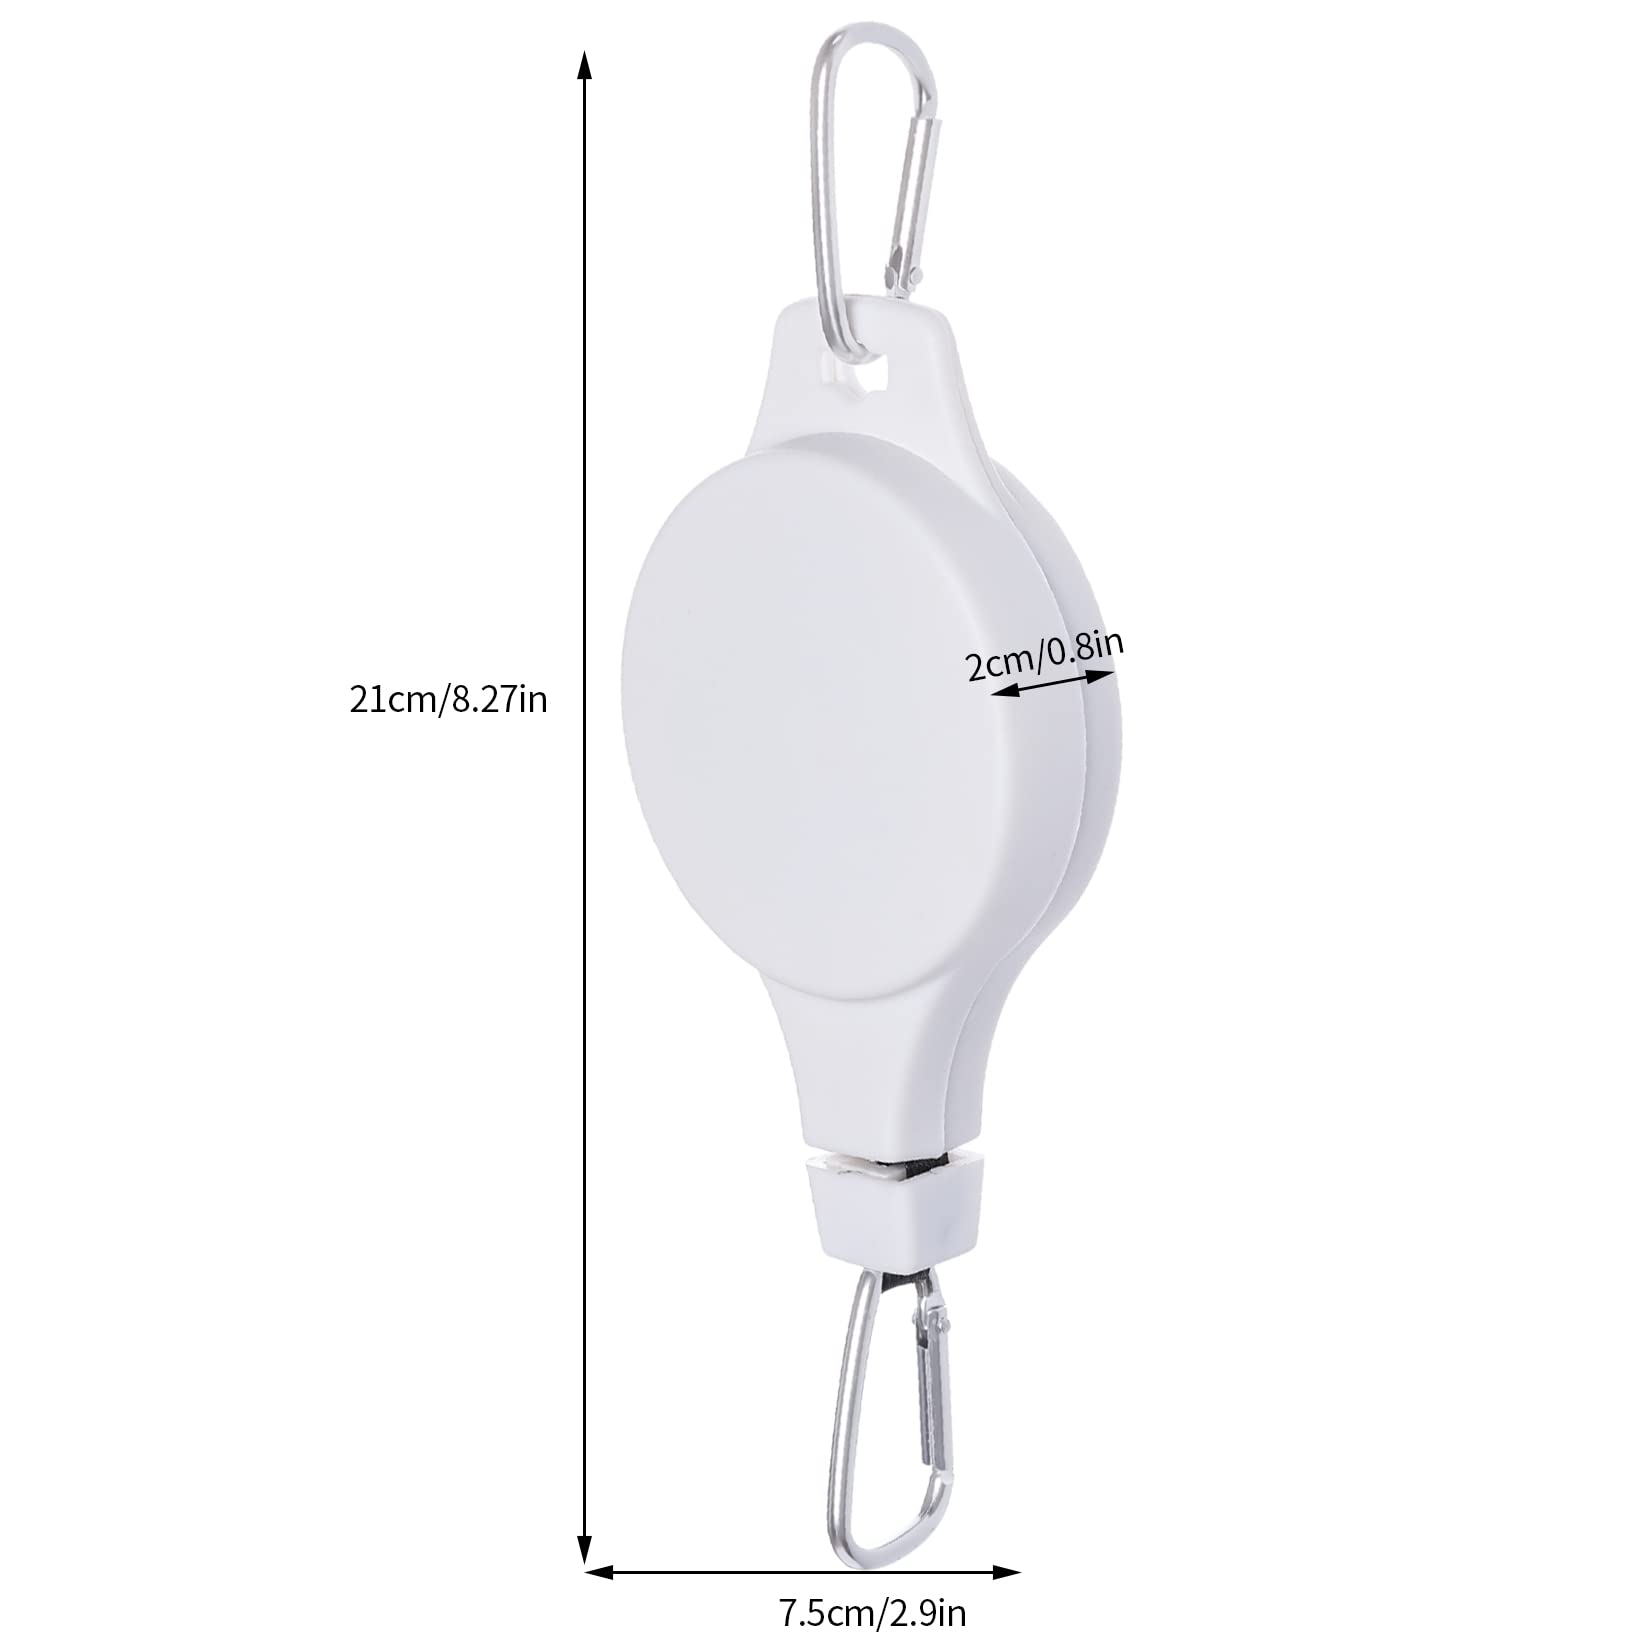 6 Pcs Plant Pulley Retractable Hanger, Easy Reach Plant Pulley Adjustable Height Wheel for Hanging Plants Heavy Duty Plant Hanger for Garden Baskets Pots & Birds Feeder - White